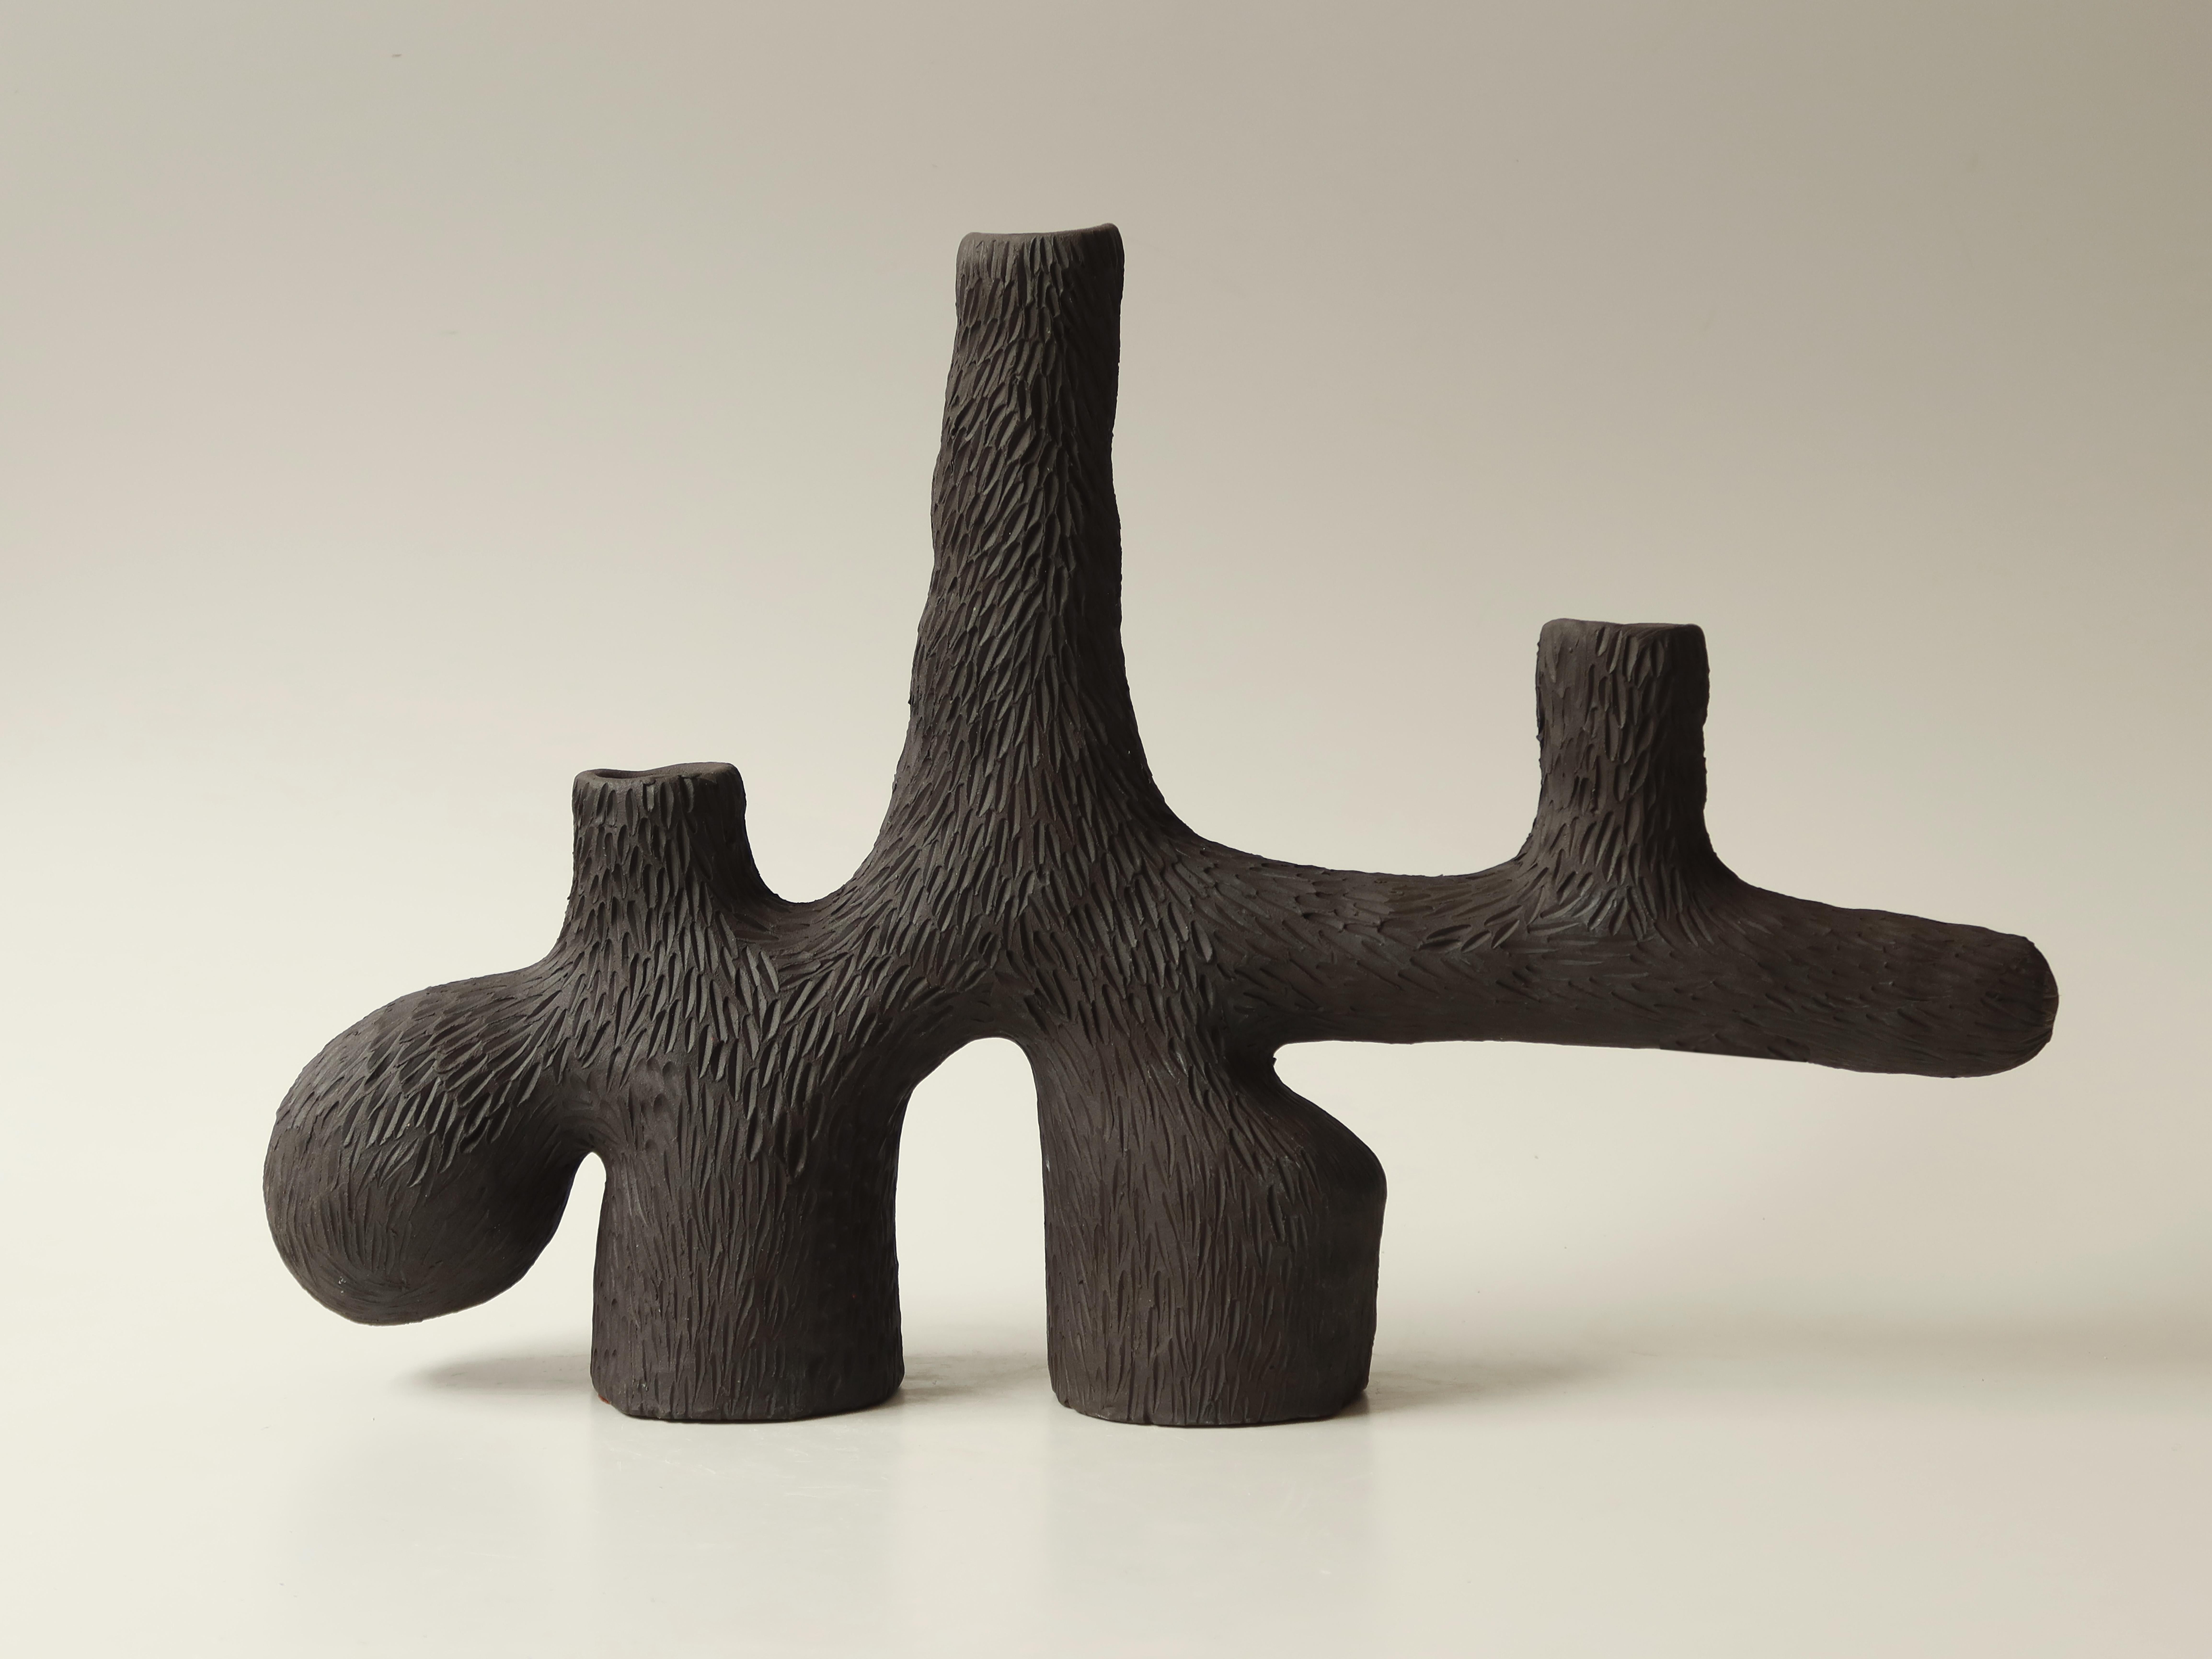 Forest candelabra no.2 by Jan Ernst.
Dimensions: W 30 x D 80 x H 28 cm.
Materials: white stoneware, black clay, terracotta.

Glazed to client specification.


Jan Ernst’s work takes on an experimental approach, as he prefers making bespoke